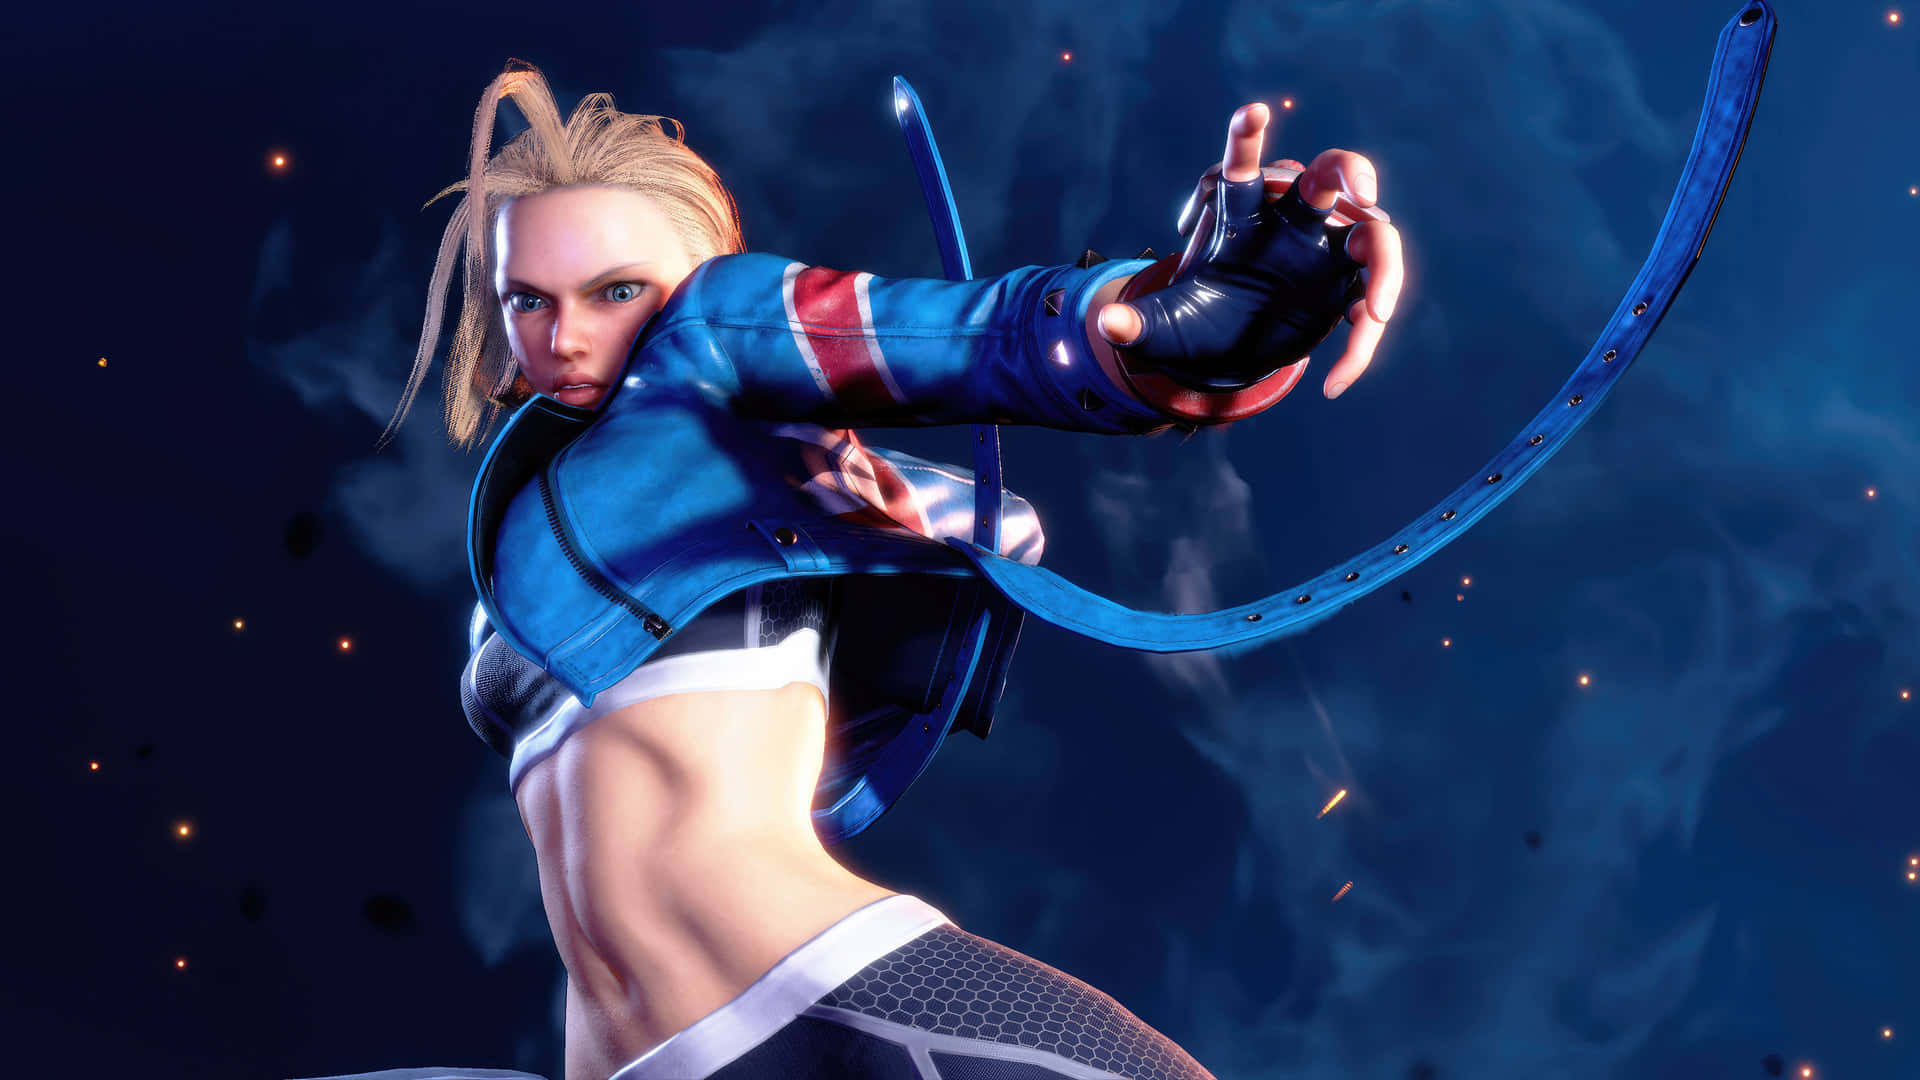 Street Fighter6 Female Fighter Action Pose Wallpaper